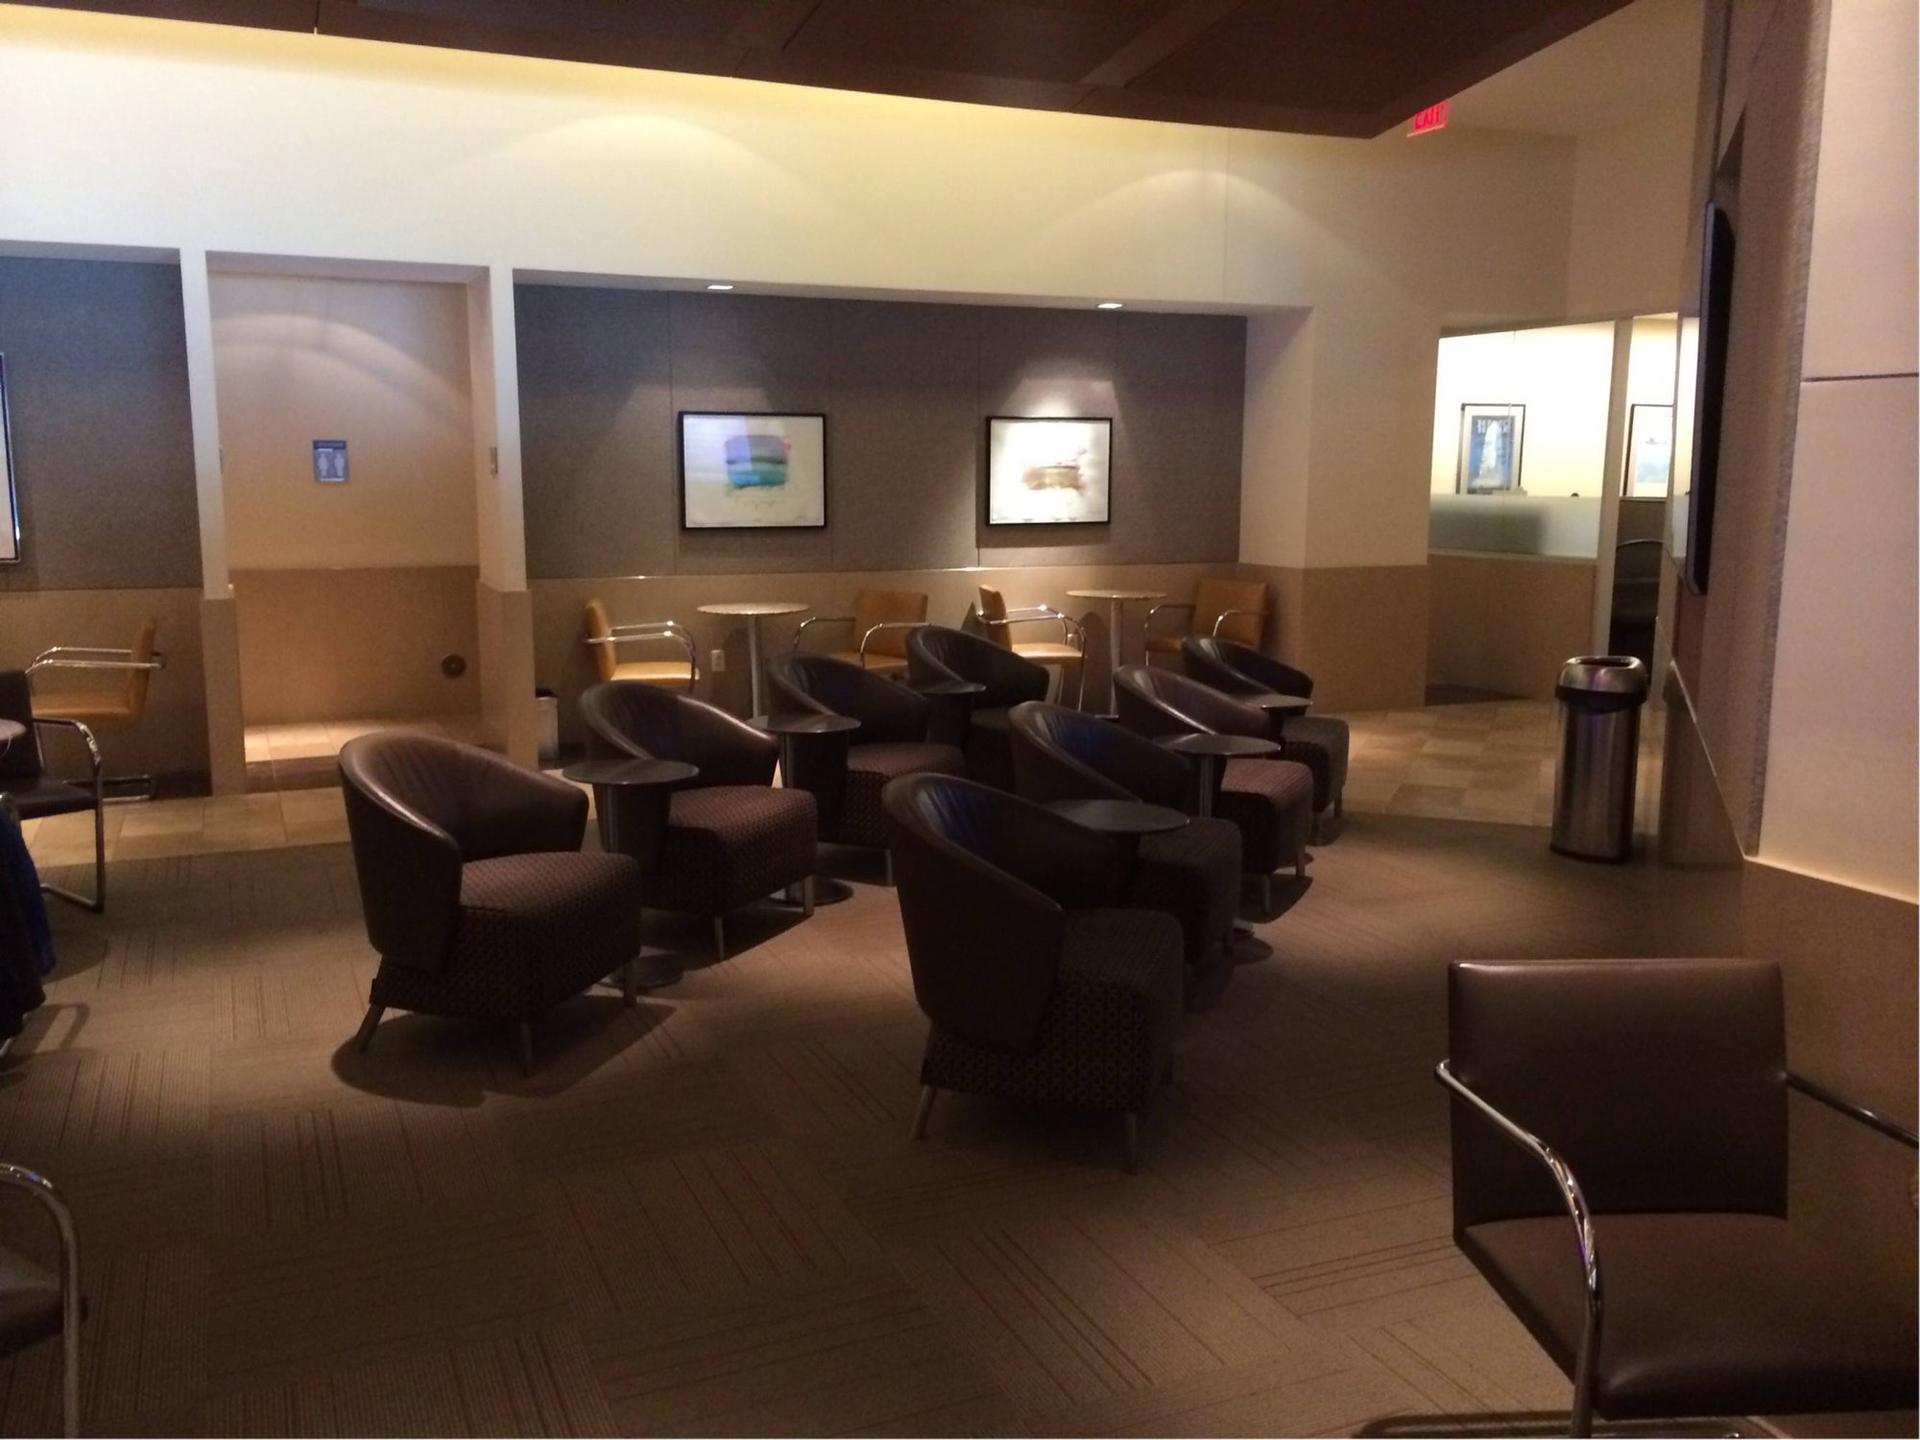 American Airlines Admirals Club image 15 of 31